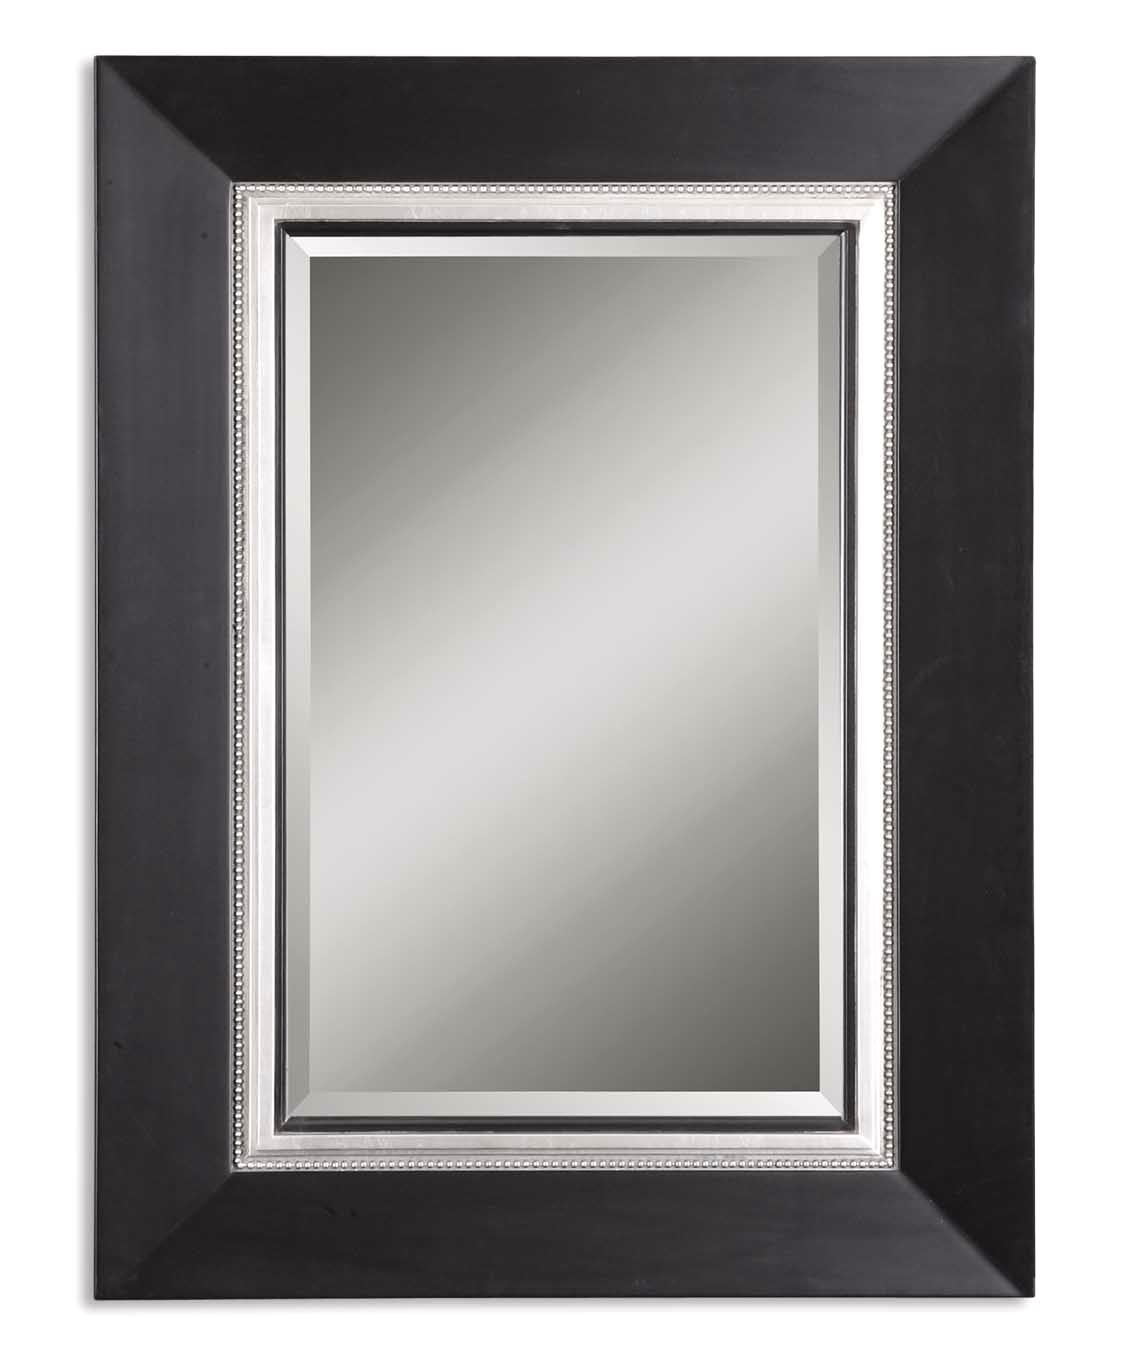 Whitmore Traditional Matte Large Black Silver Rectangular Mirror With With Regard To Matte Black Rectangular Wall Mirrors (View 3 of 15)